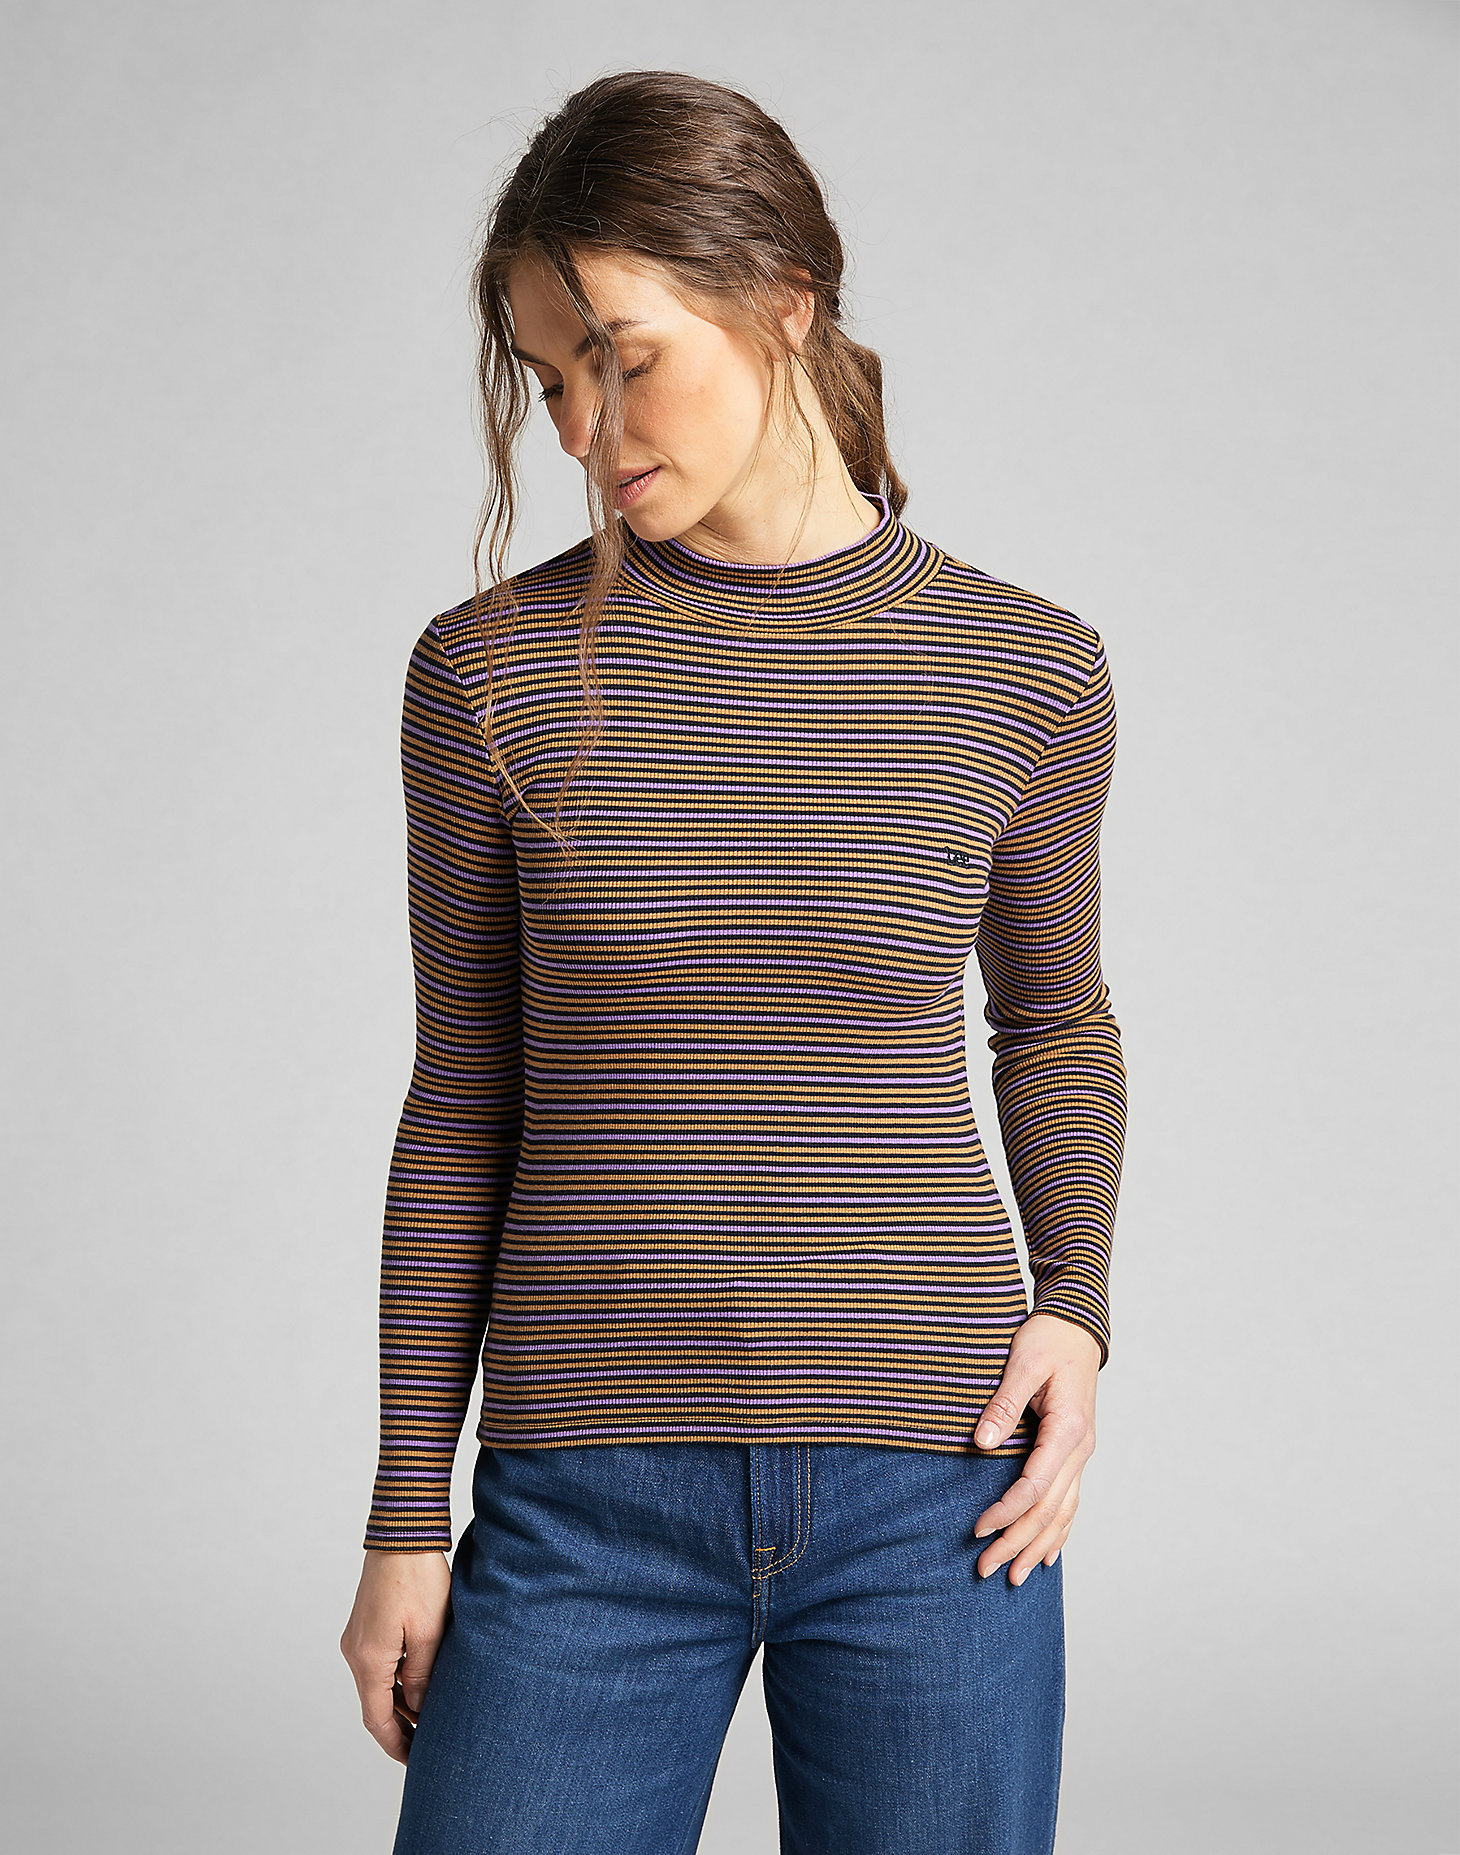 Ribbed Long Sleeve Striped Tee in Black alternative view 3